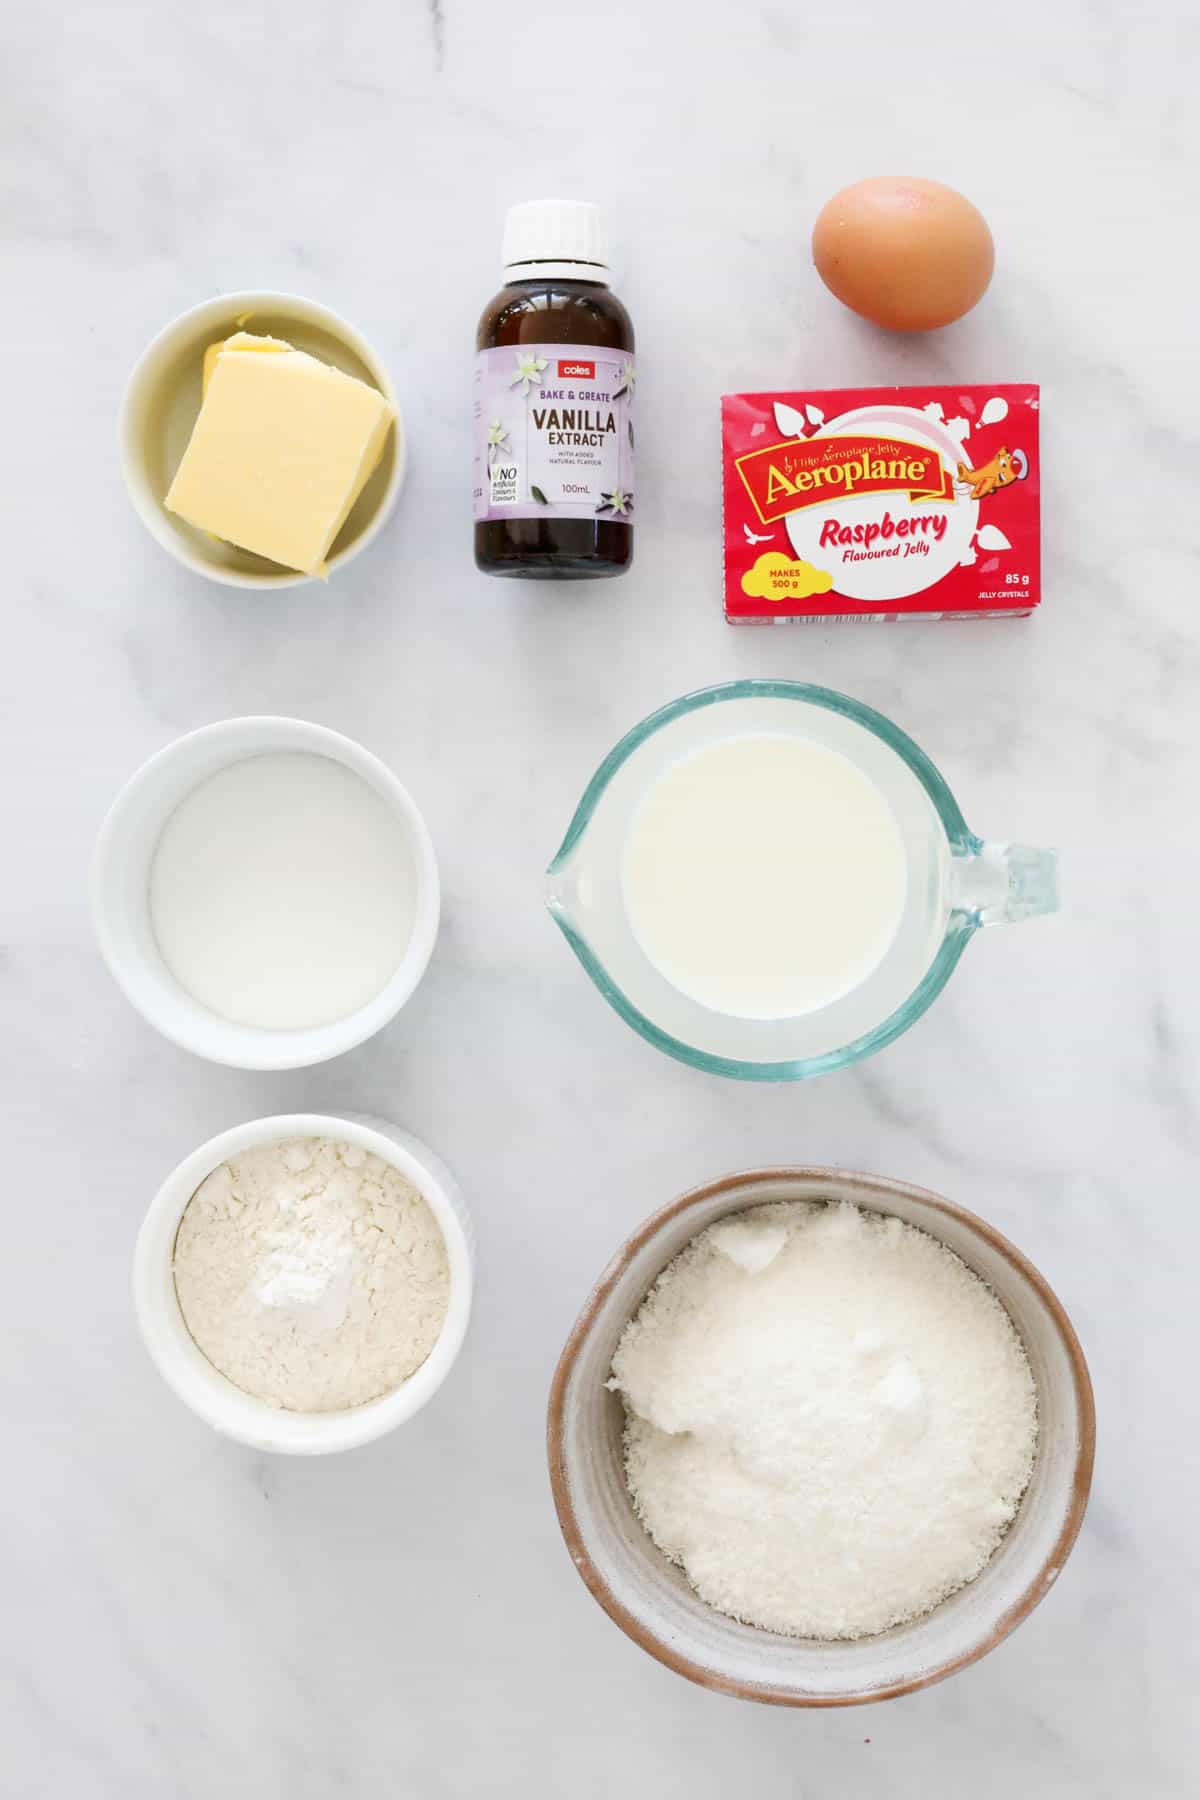 The ingredients for jelly cakes.